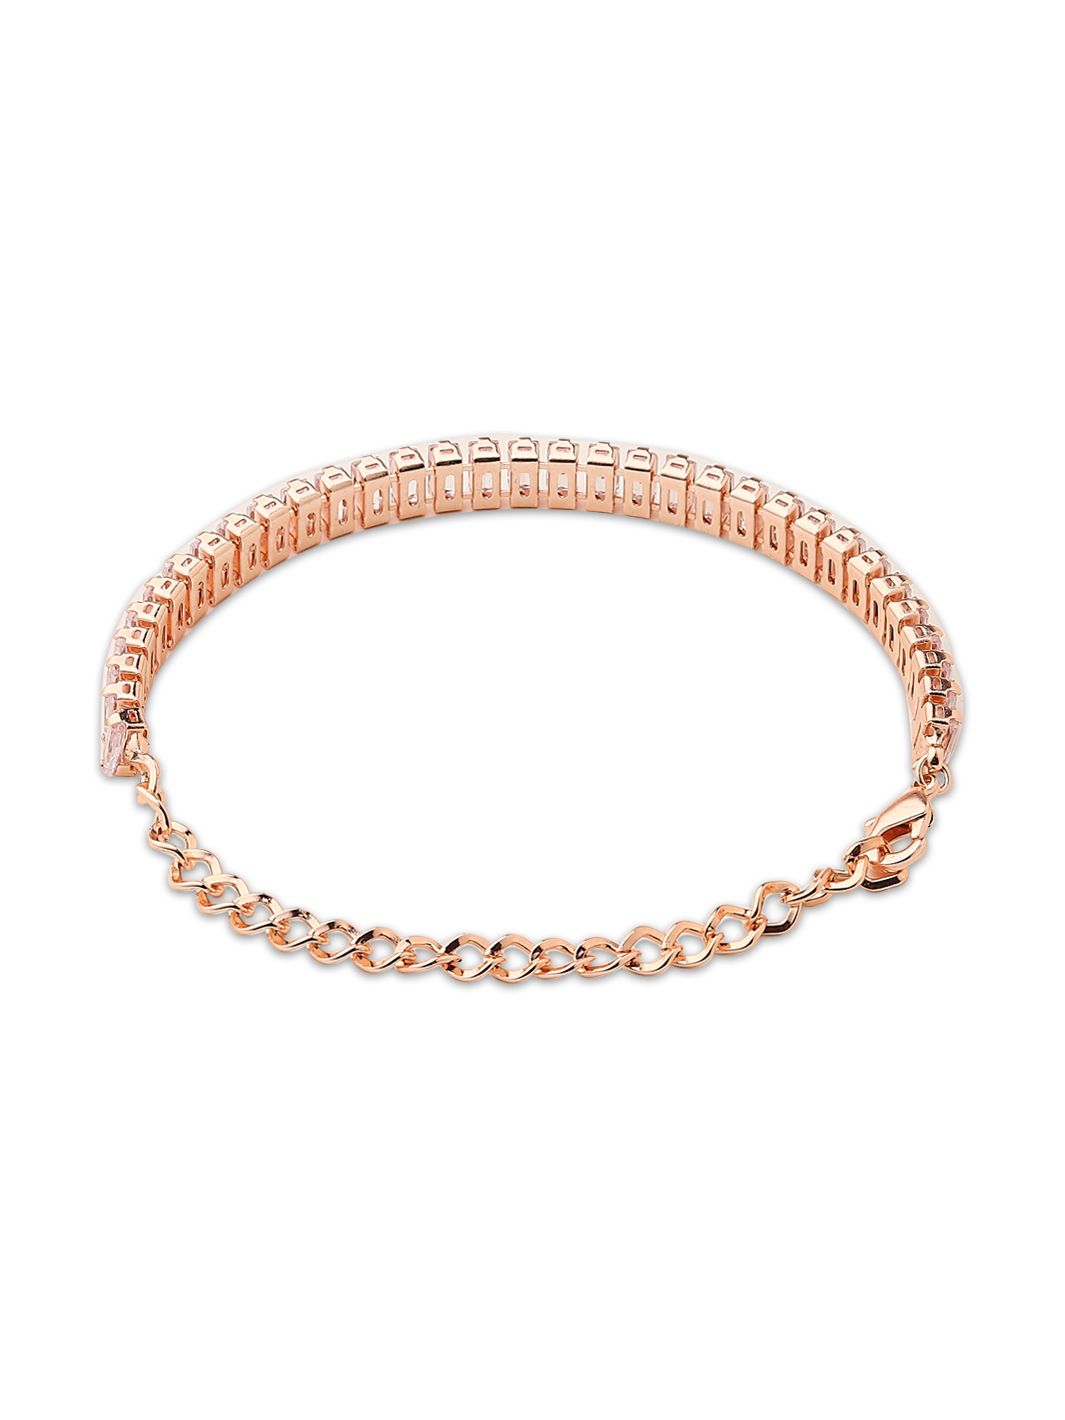 Gold Plated Silver 5mm Curb Link Bracelet | Jewellerybox.co.uk